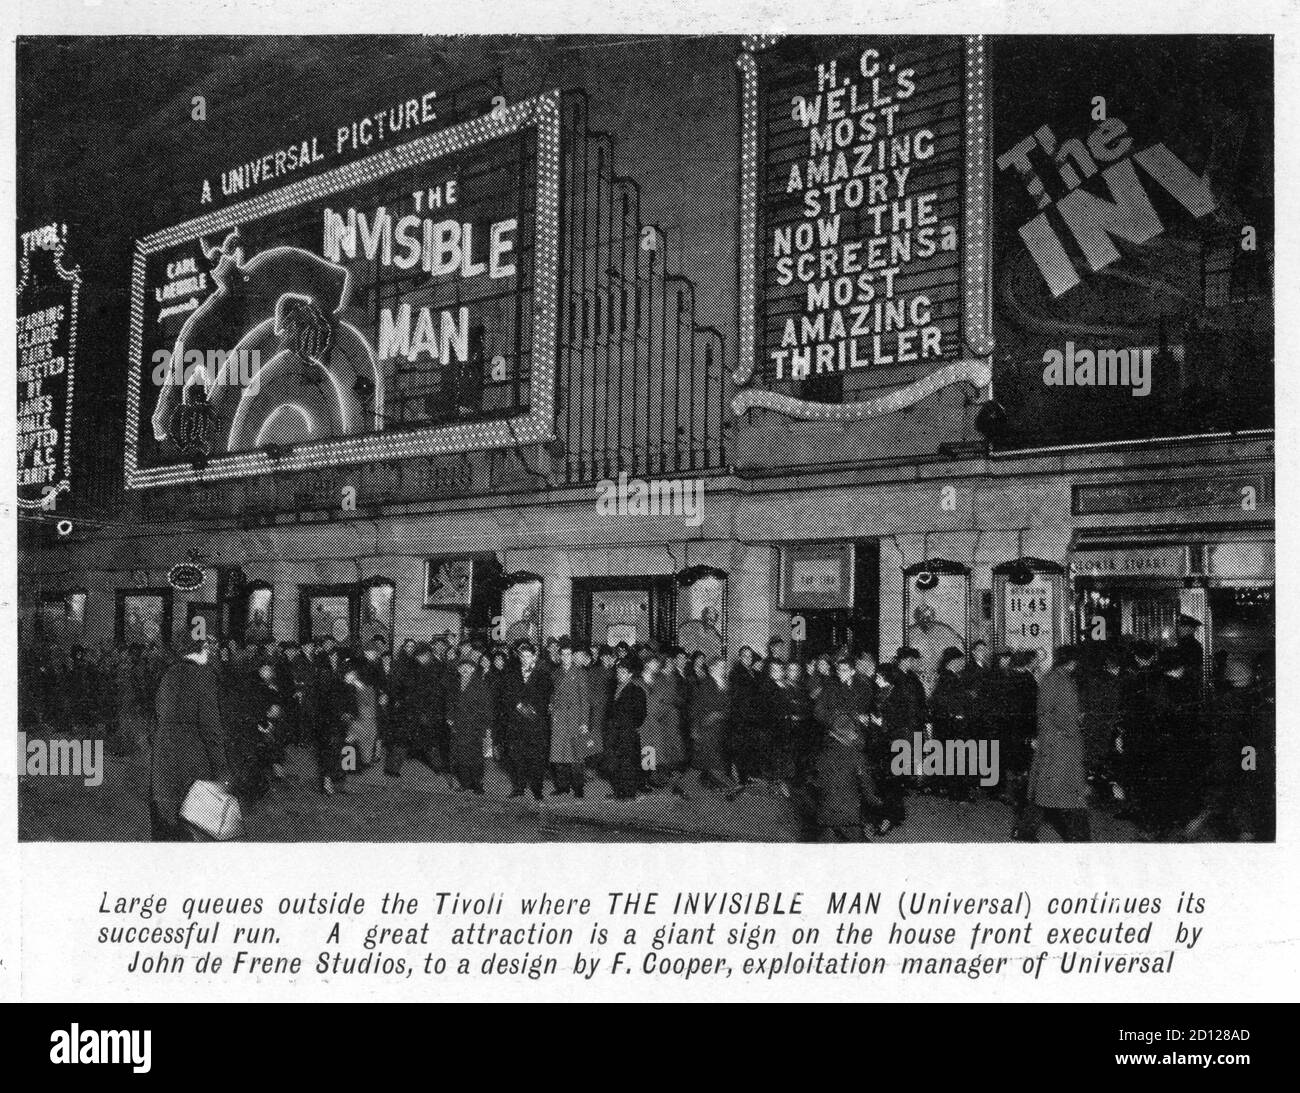 Cinema Front of Tivoli Theatre on the Strand in London for CLAUDE RAINS as THE INVISIBLE MAN 1933 director JAMES WHALE novel H. G. WELLS screenplay R.C. Sherriff Universal Pictures Stock Photo